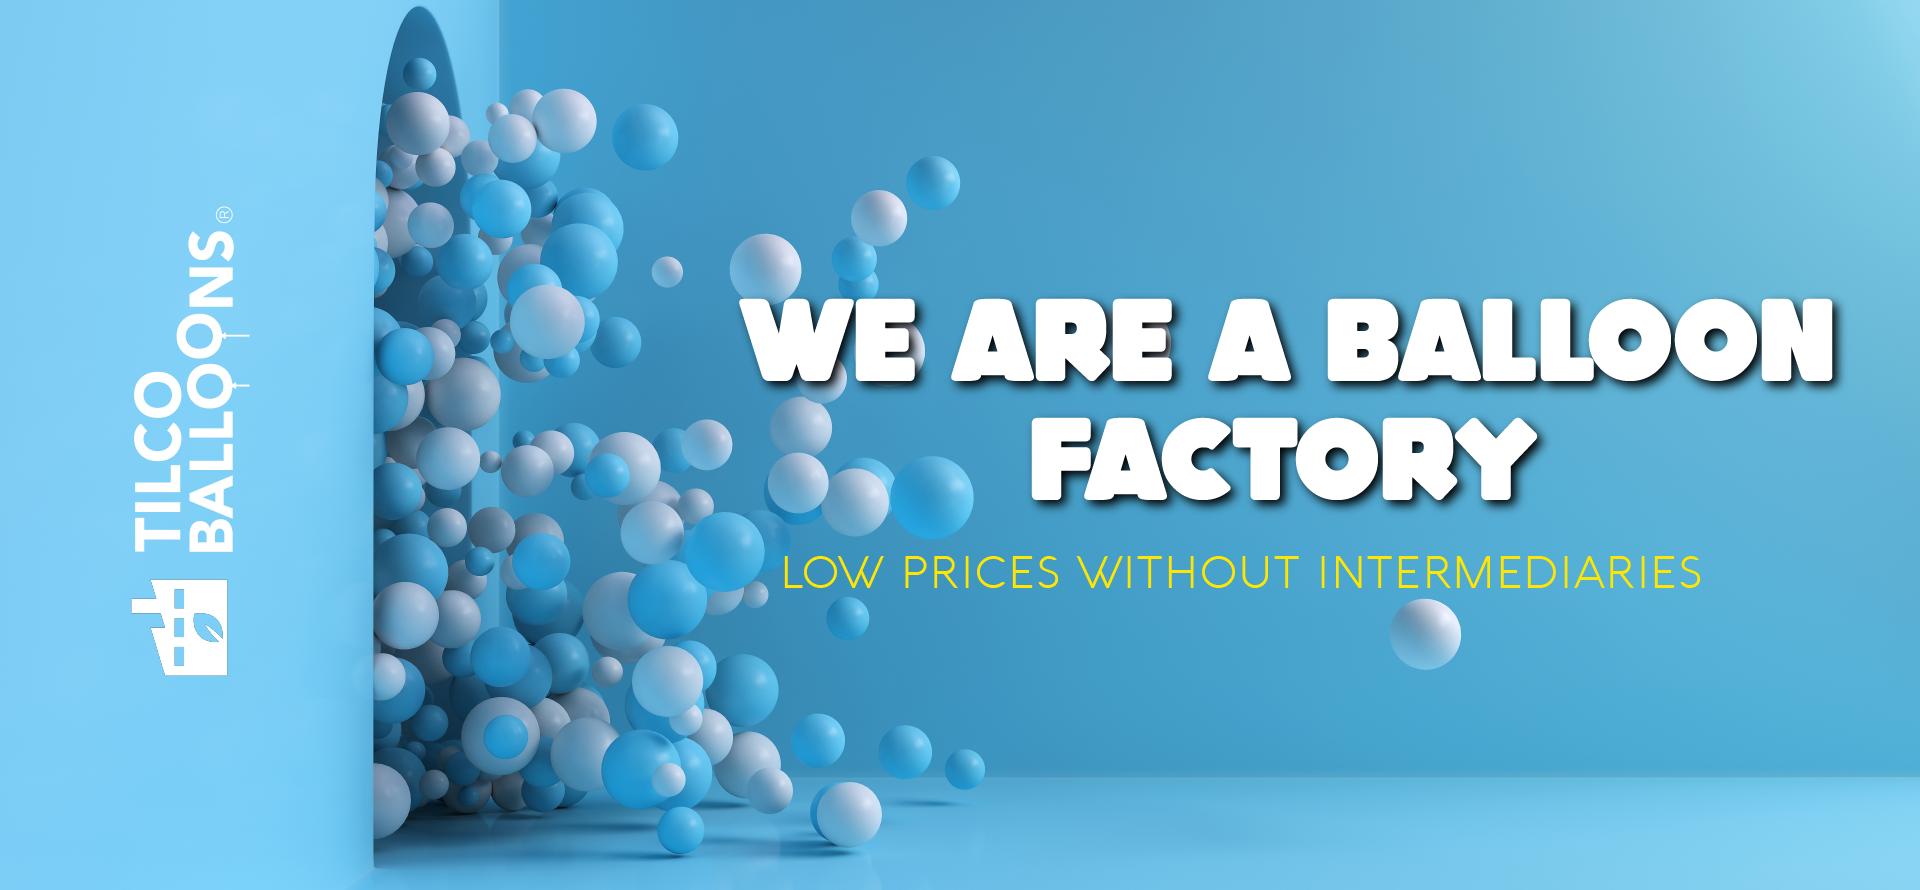 We are a balloon factory, low prices without intermediaries